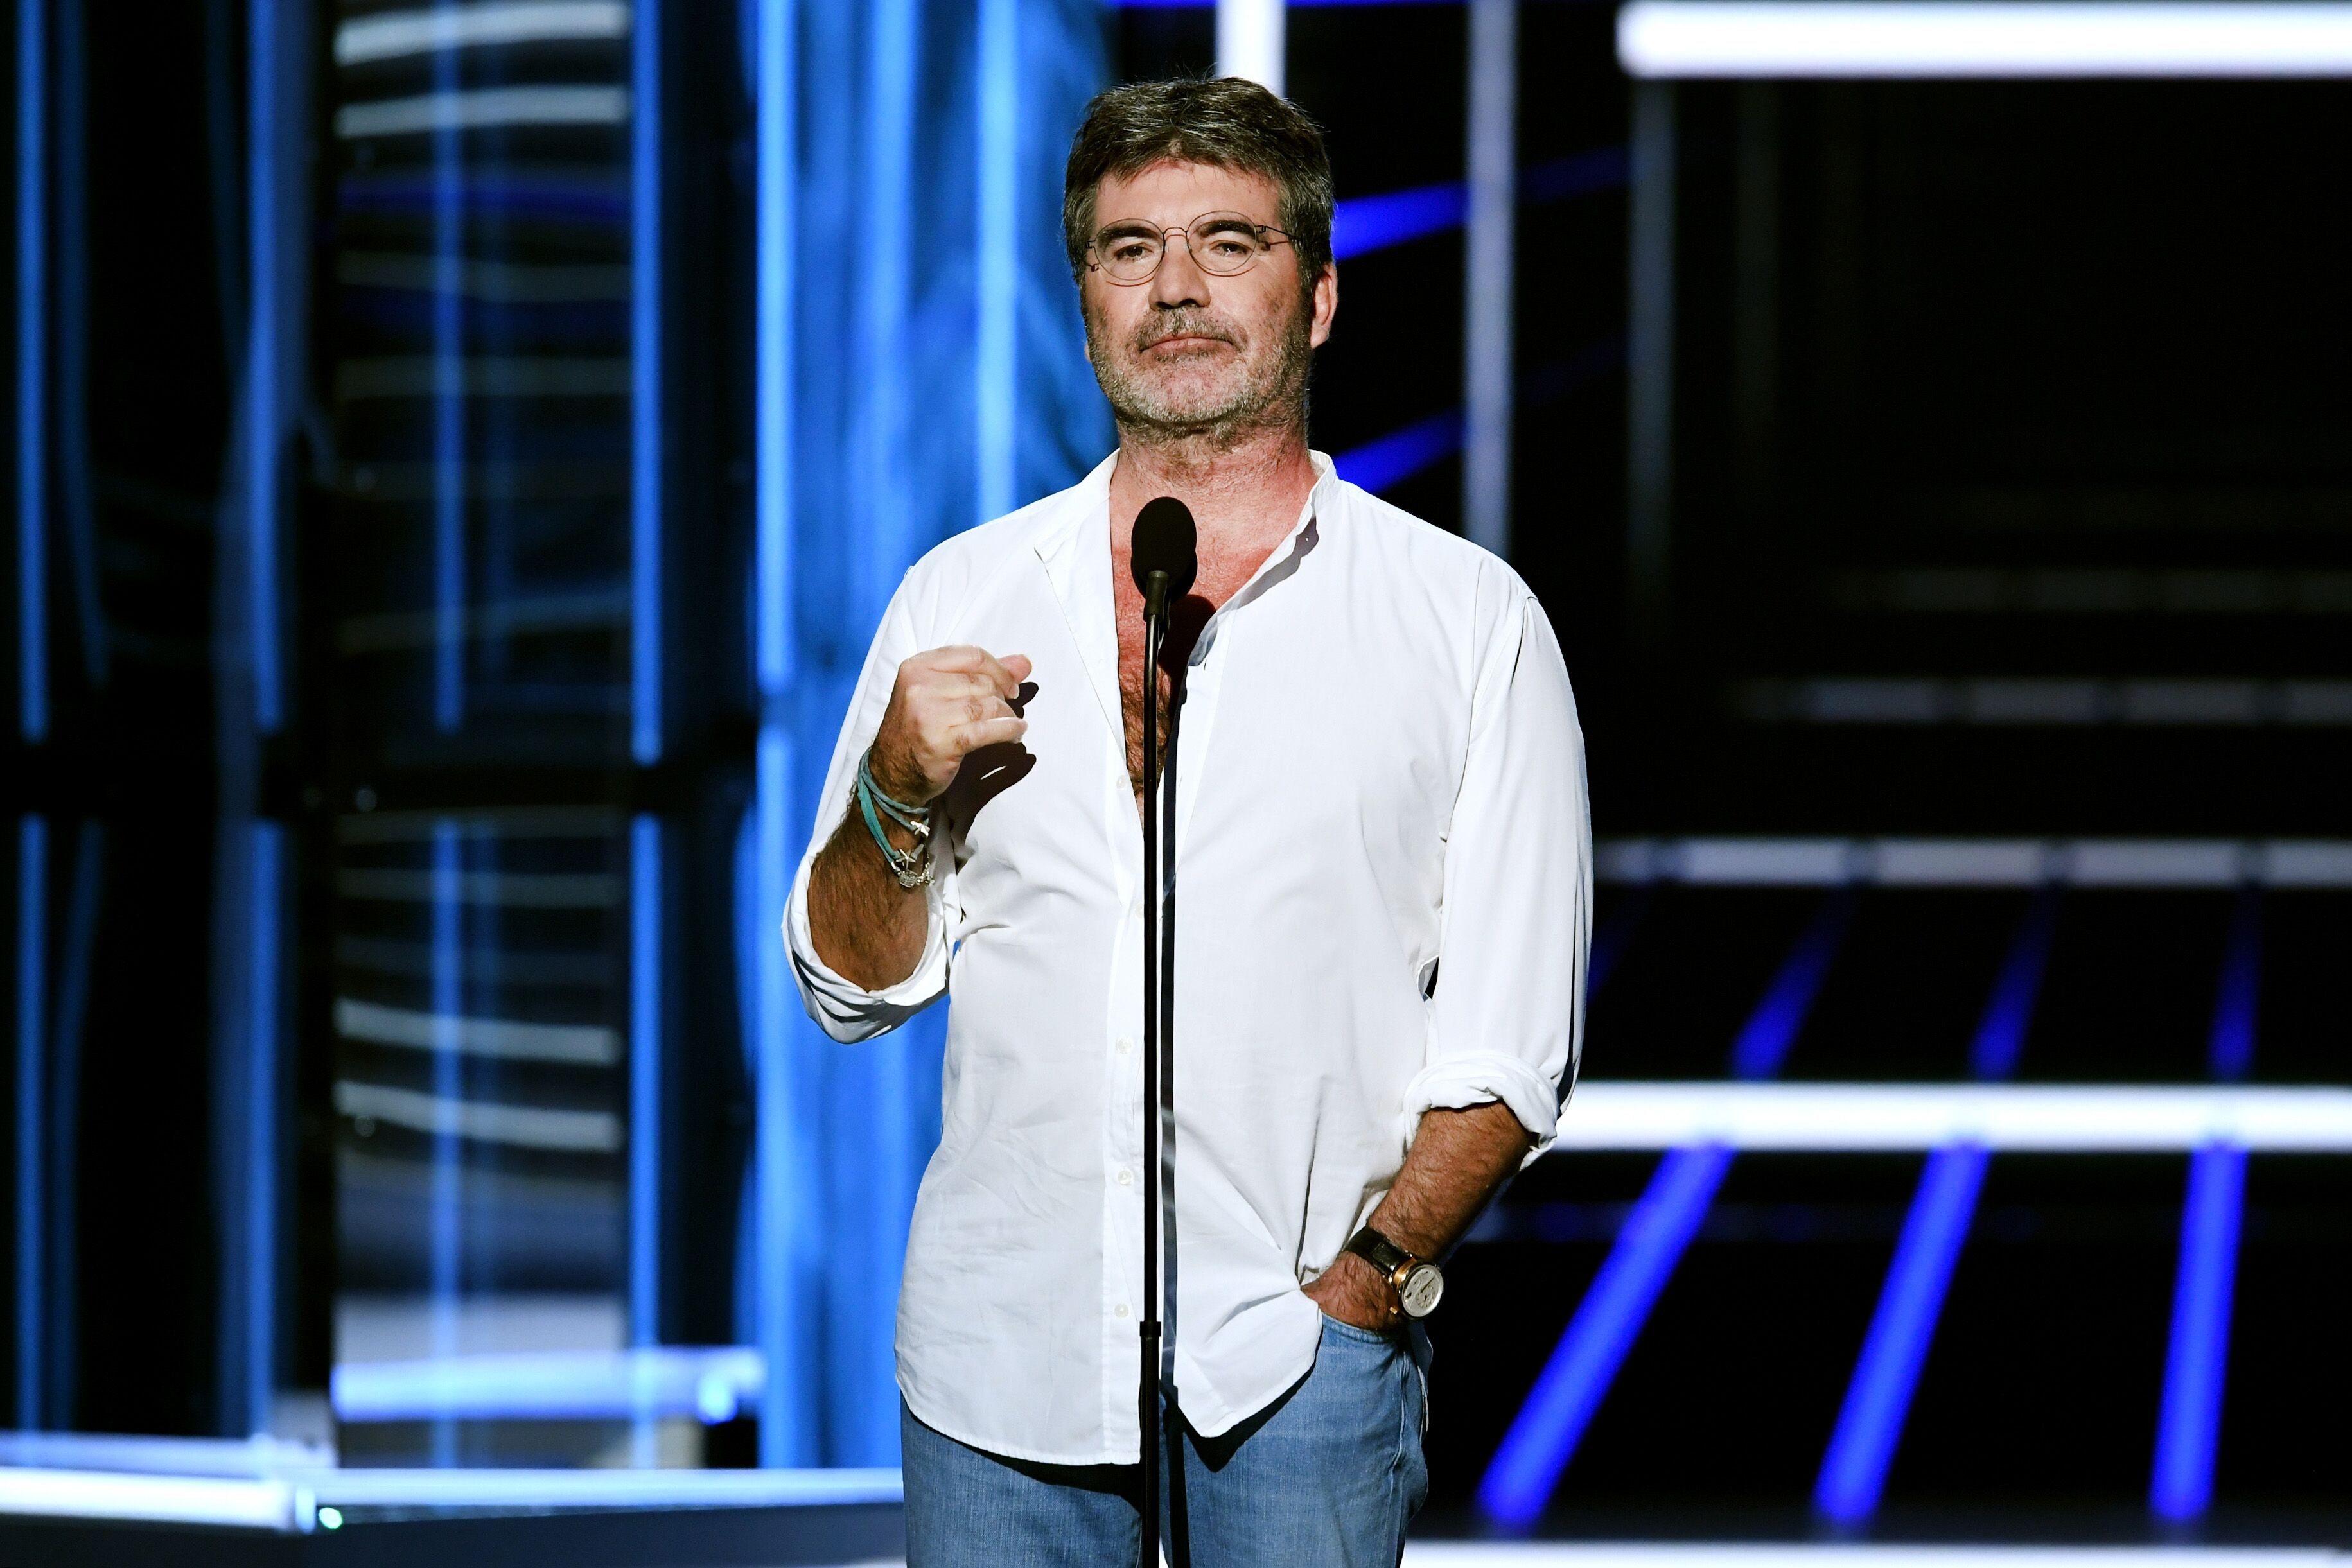 Simon Cowell speaking before an audience. | Source: Getty Images